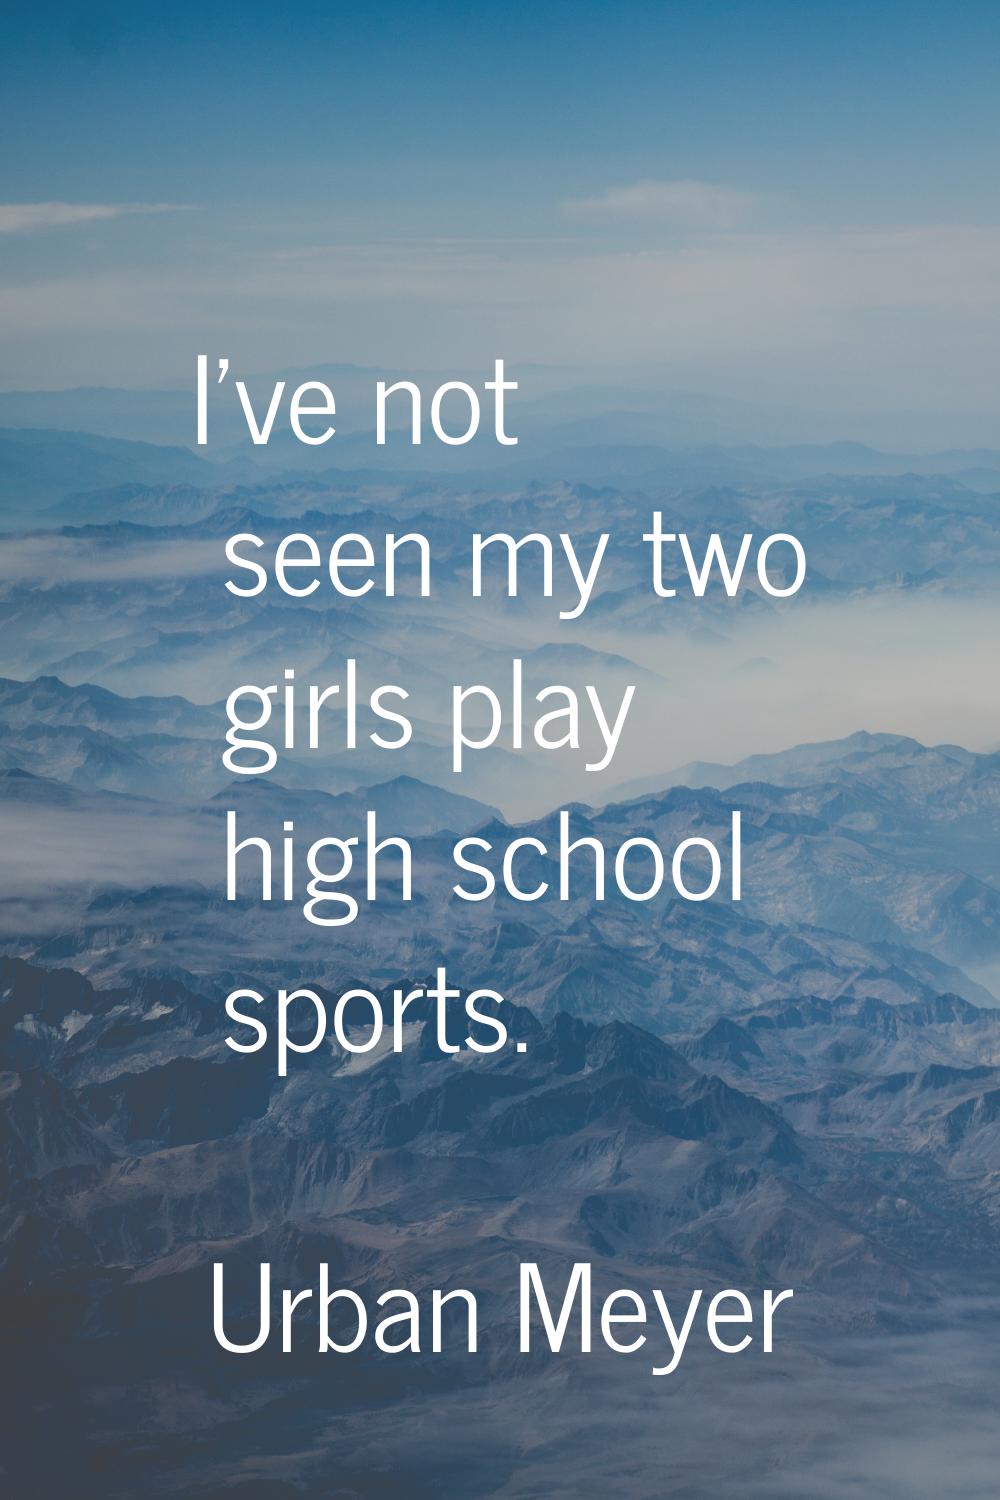 I've not seen my two girls play high school sports.